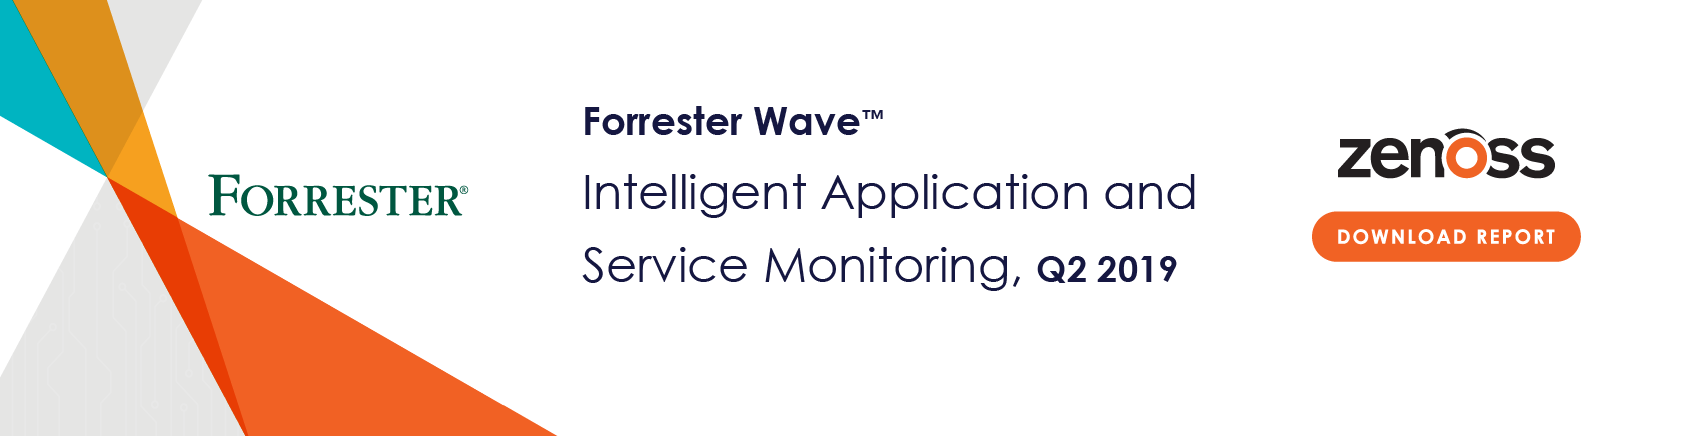 The Forrester Wave: Intelligent Application & Service Monitoring, Q2 2019